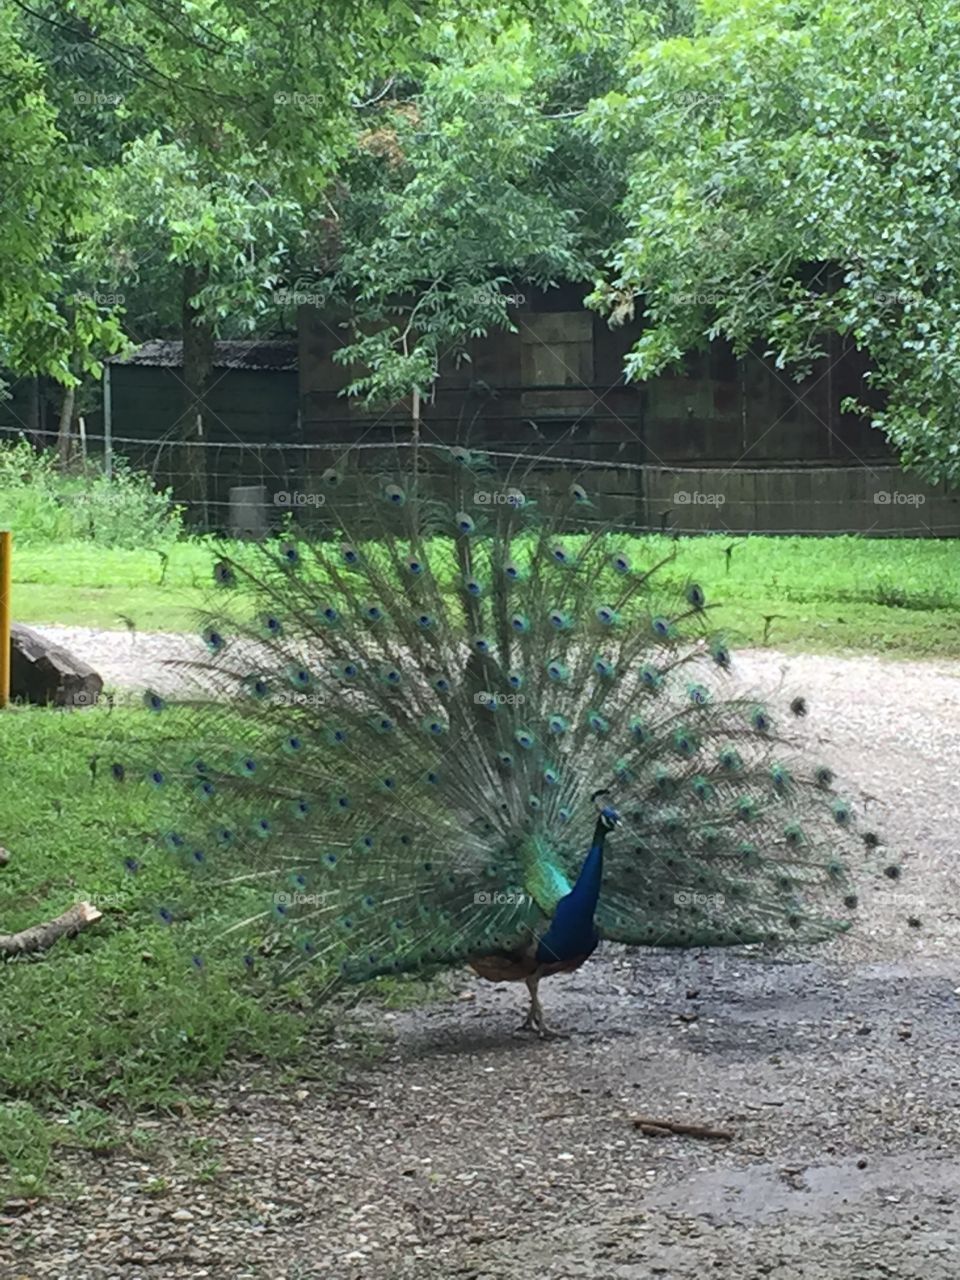 Peacock at the zoo